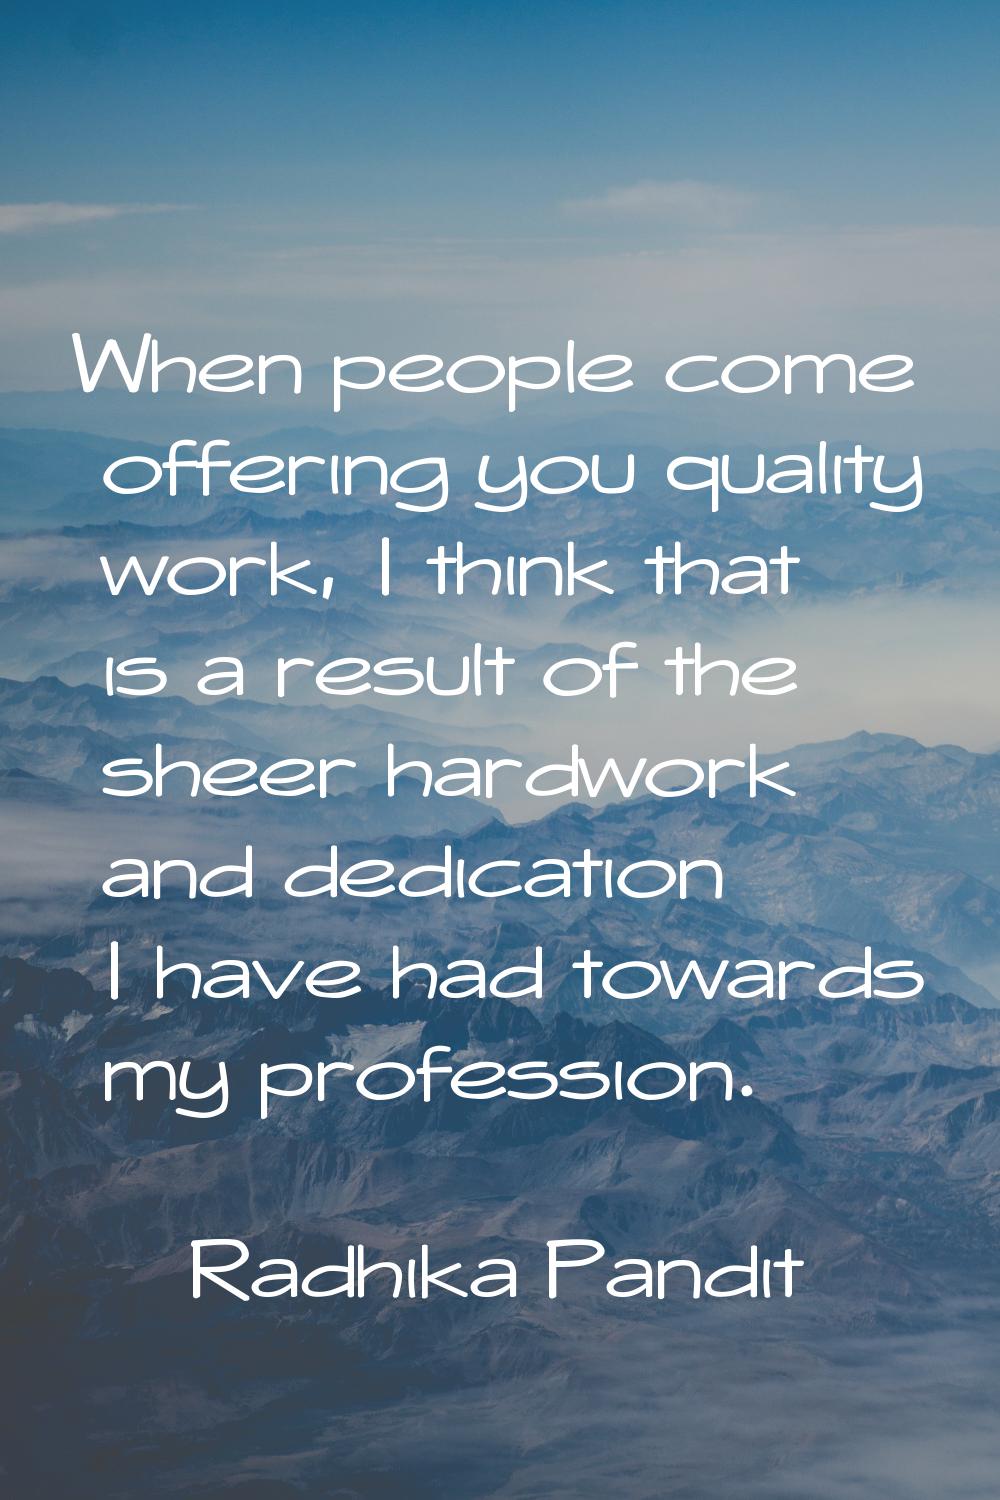 When people come offering you quality work, I think that is a result of the sheer hardwork and dedi